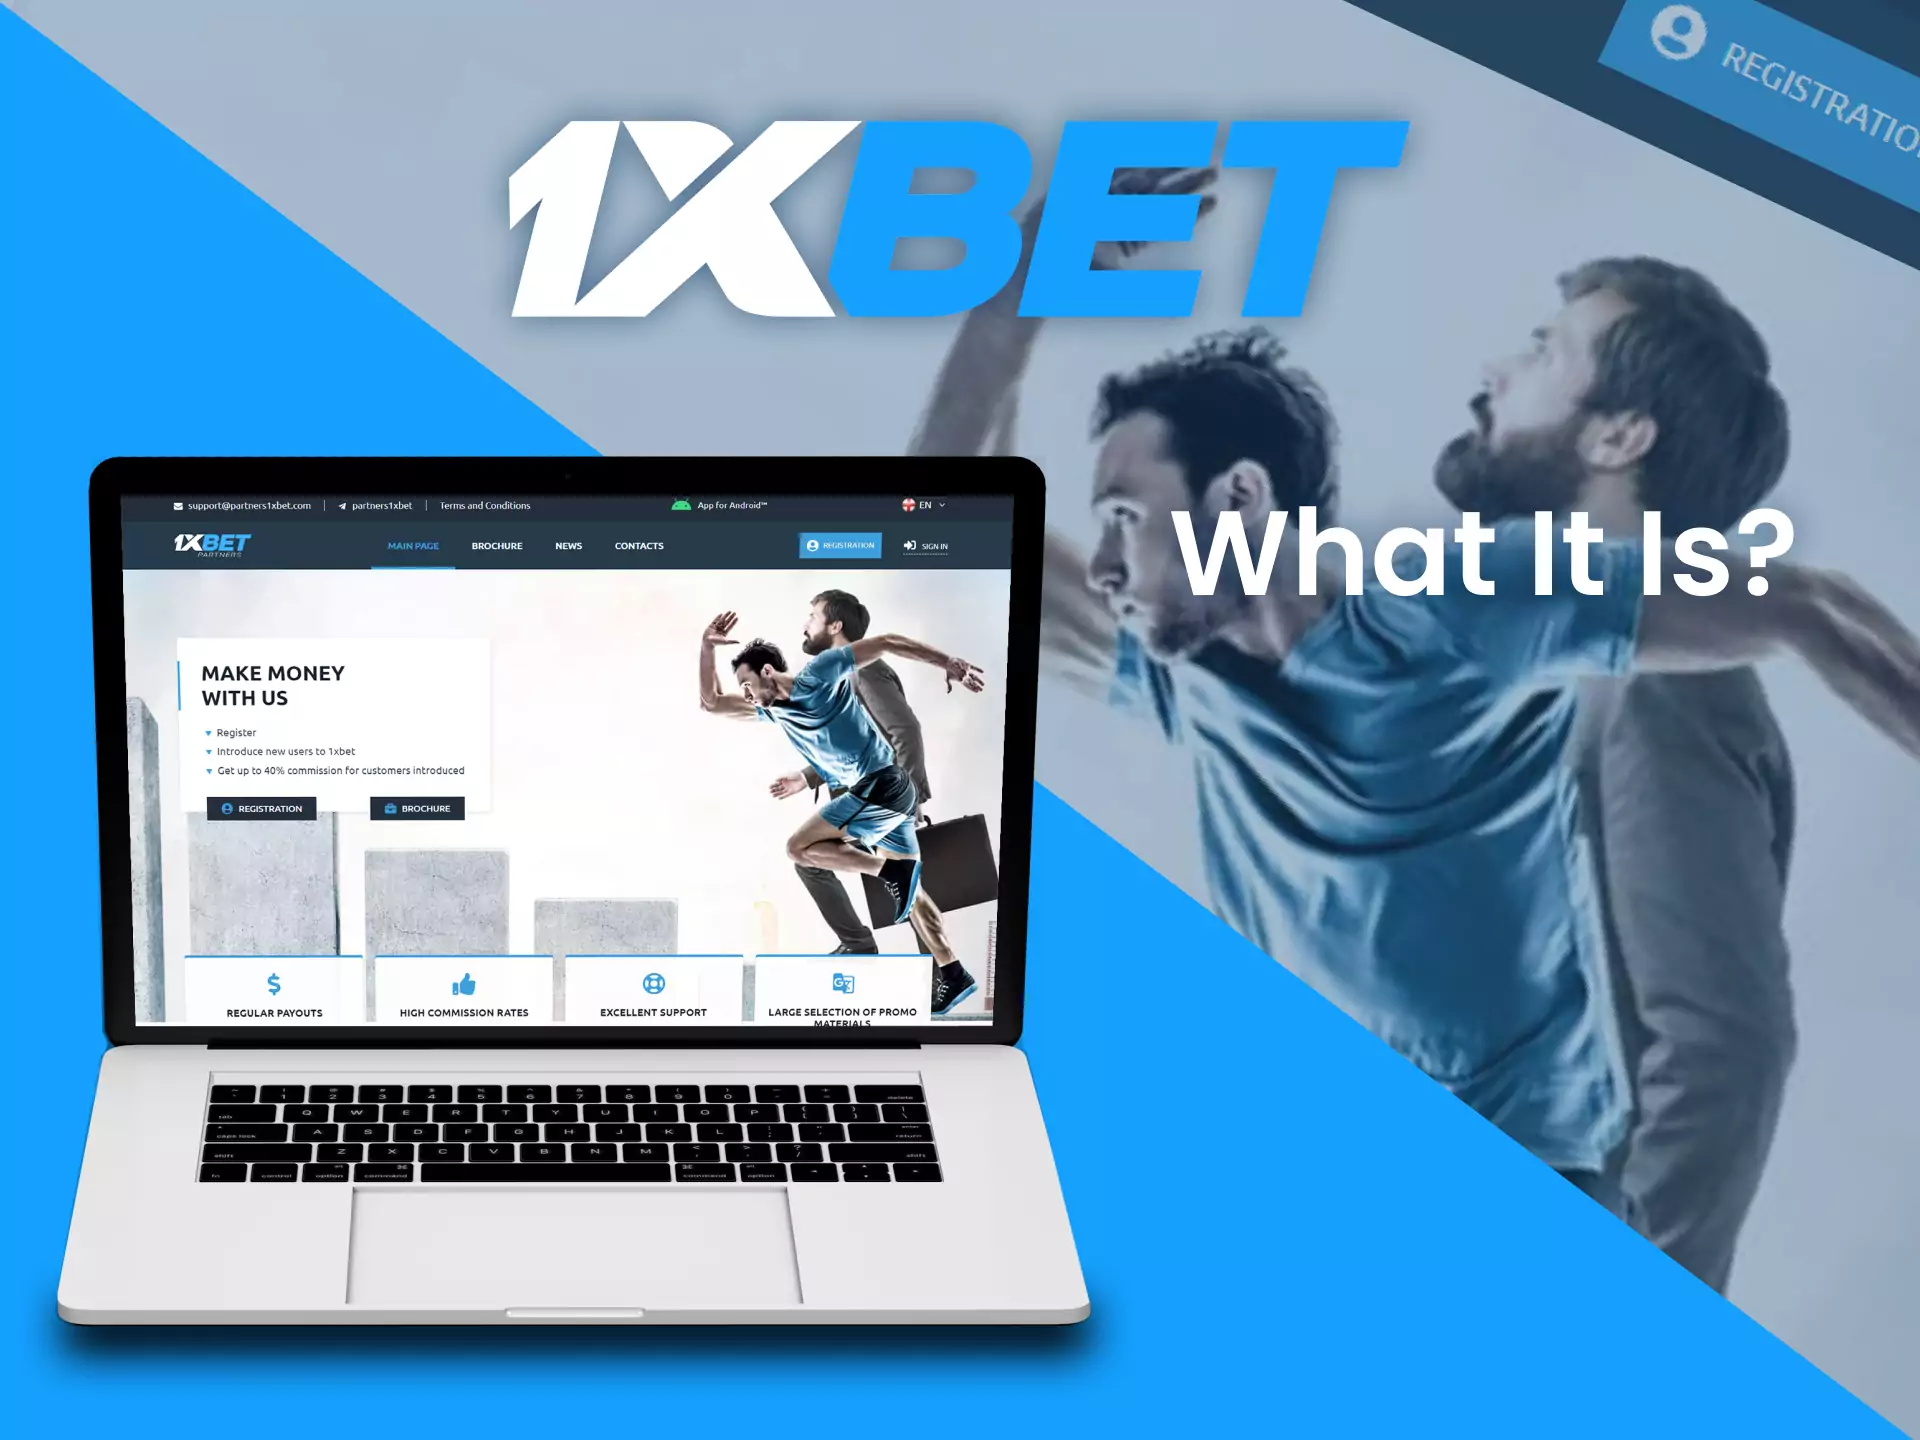 The 1xbet affiliate program helps to earn more money by inviting new users to the betting platform.